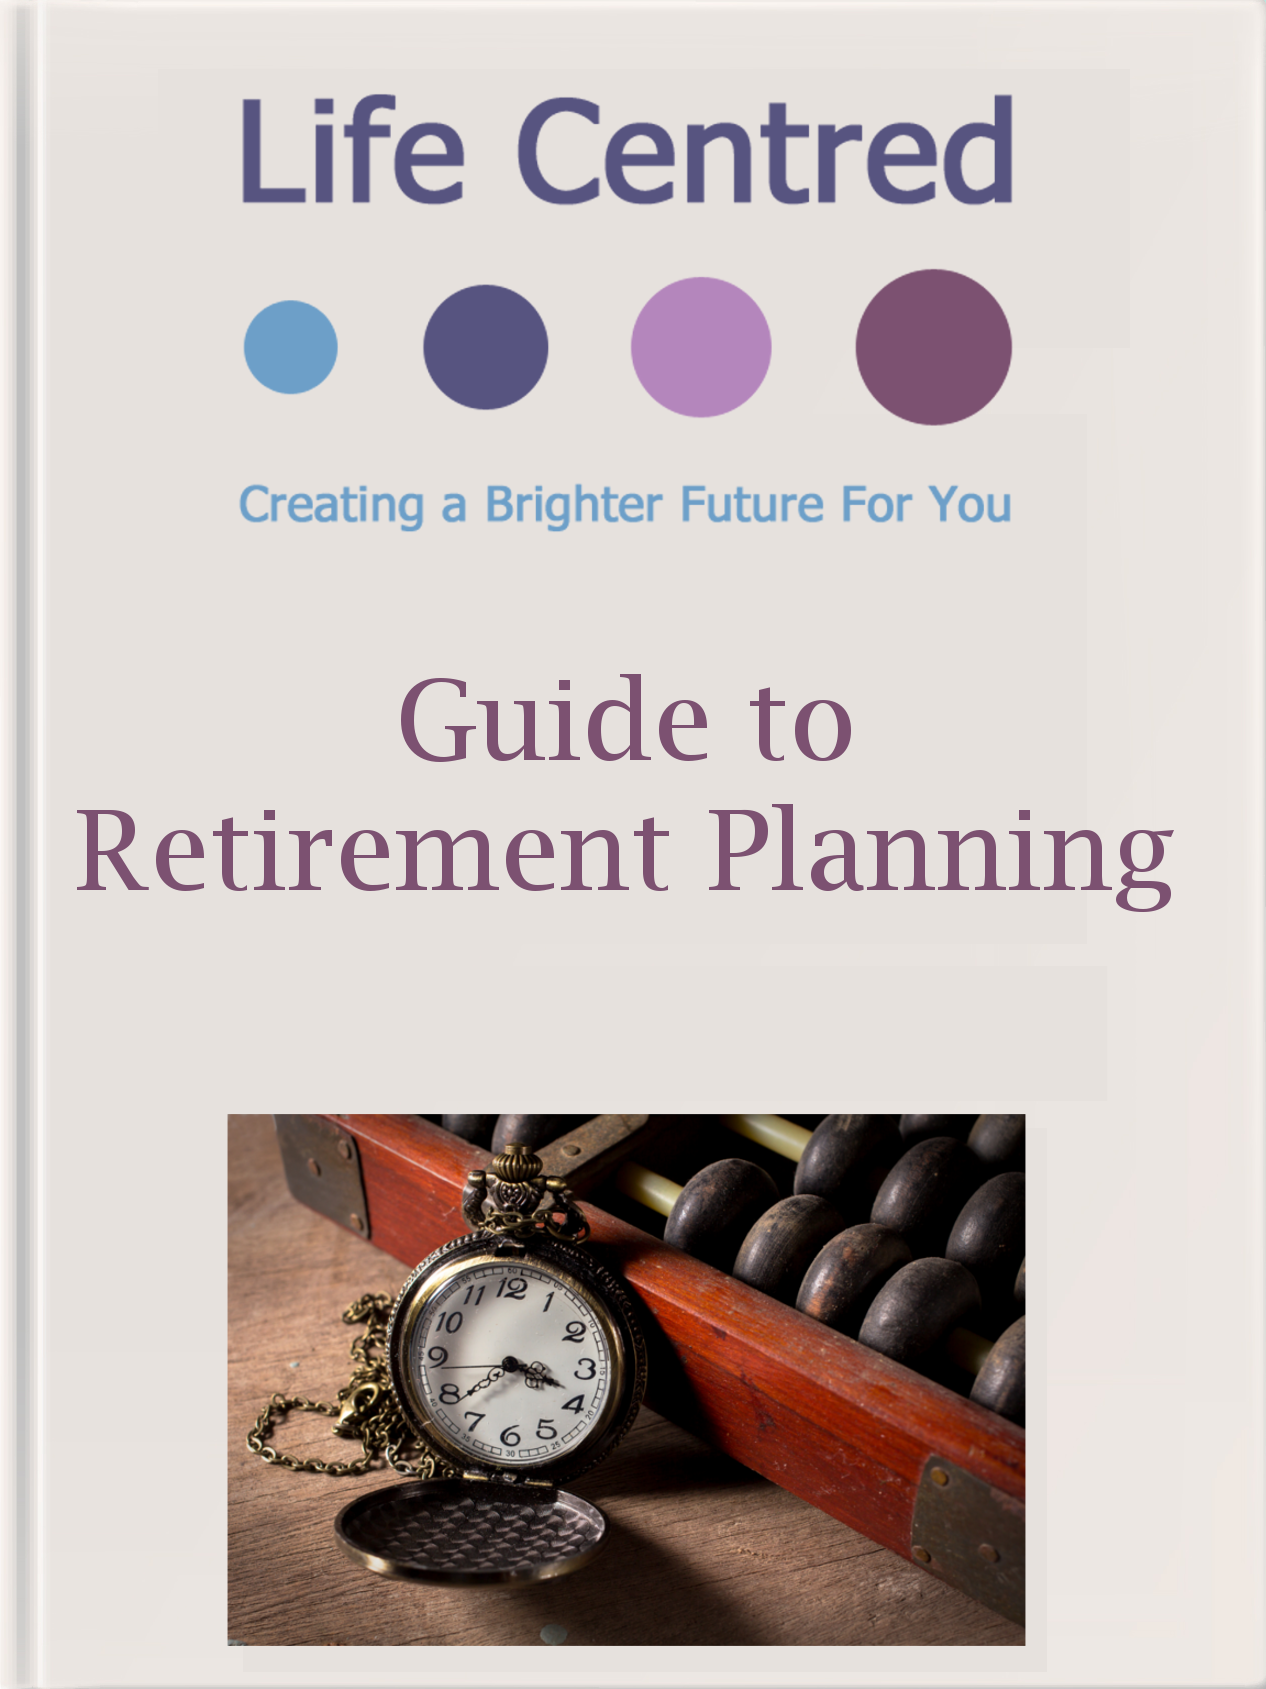 Download our Retirement Guide